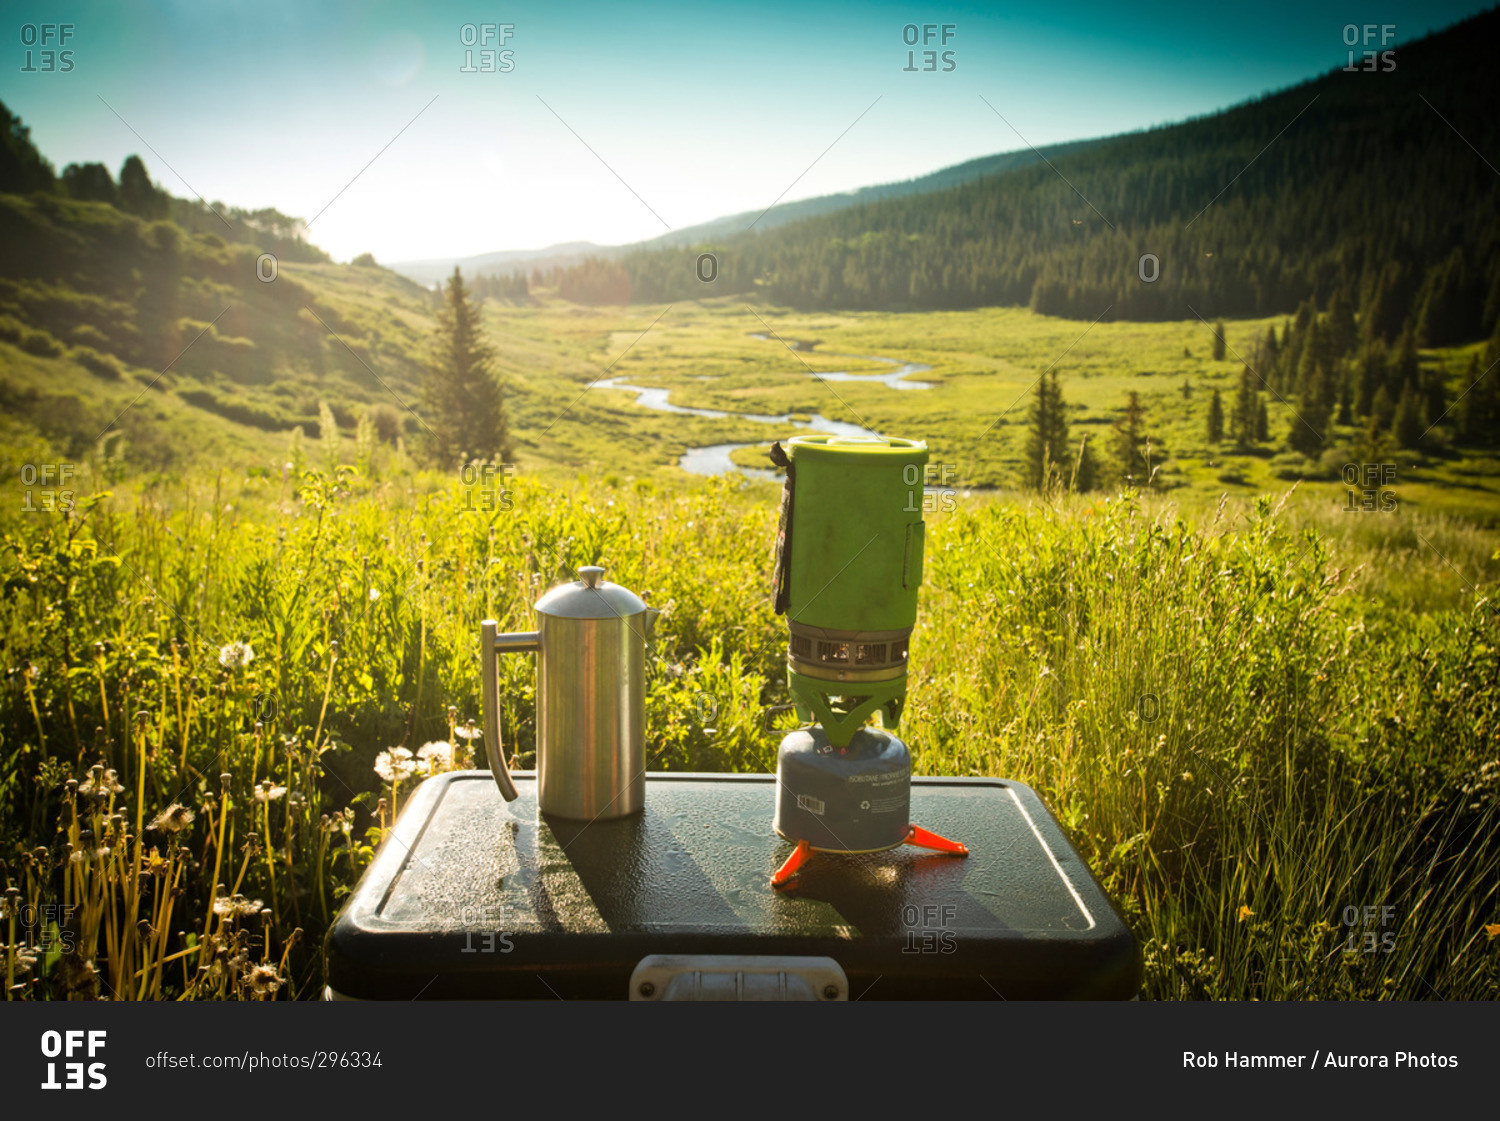 Morning coffee is prepared on a camping trip in Yampa, Colorado.